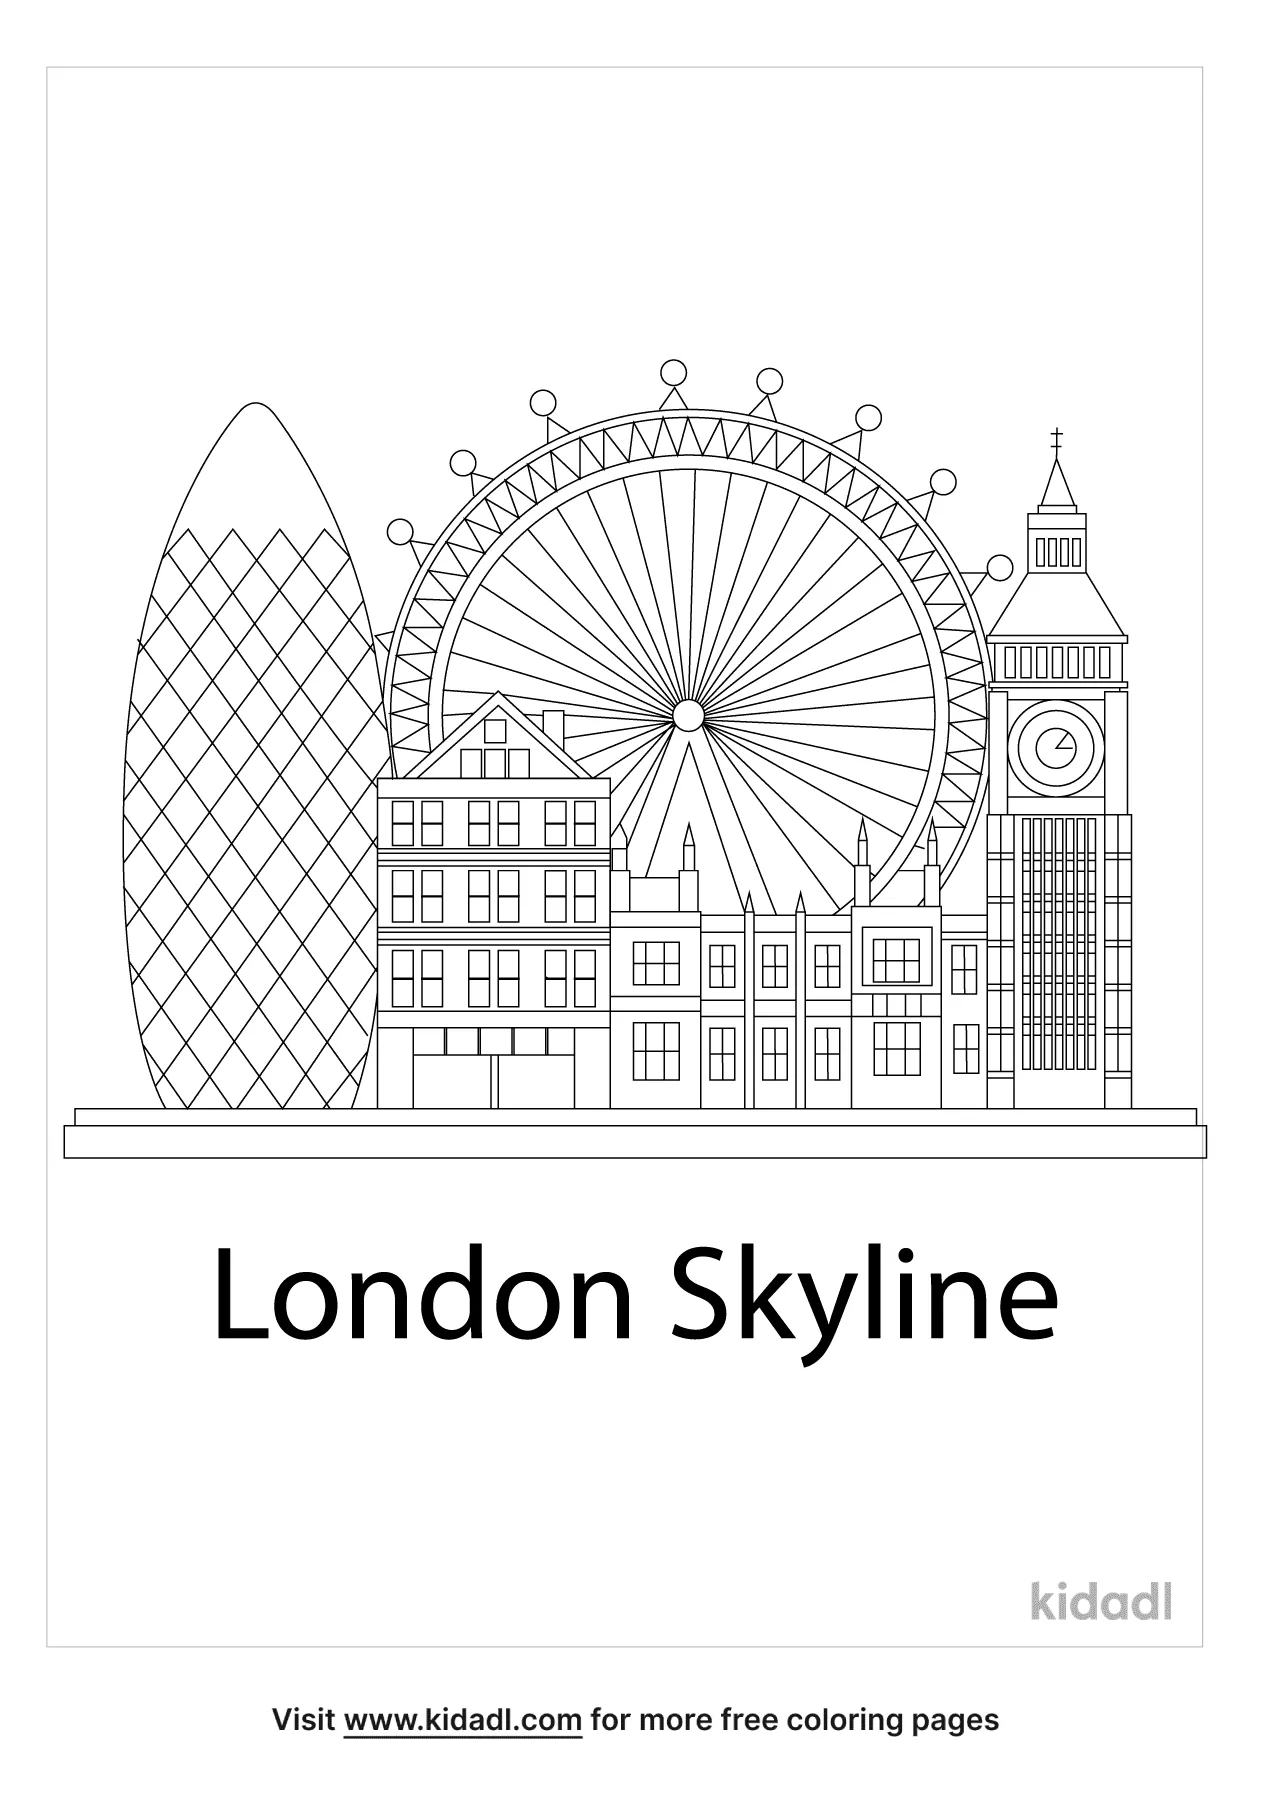 Free london skyline coloring page coloring page printables